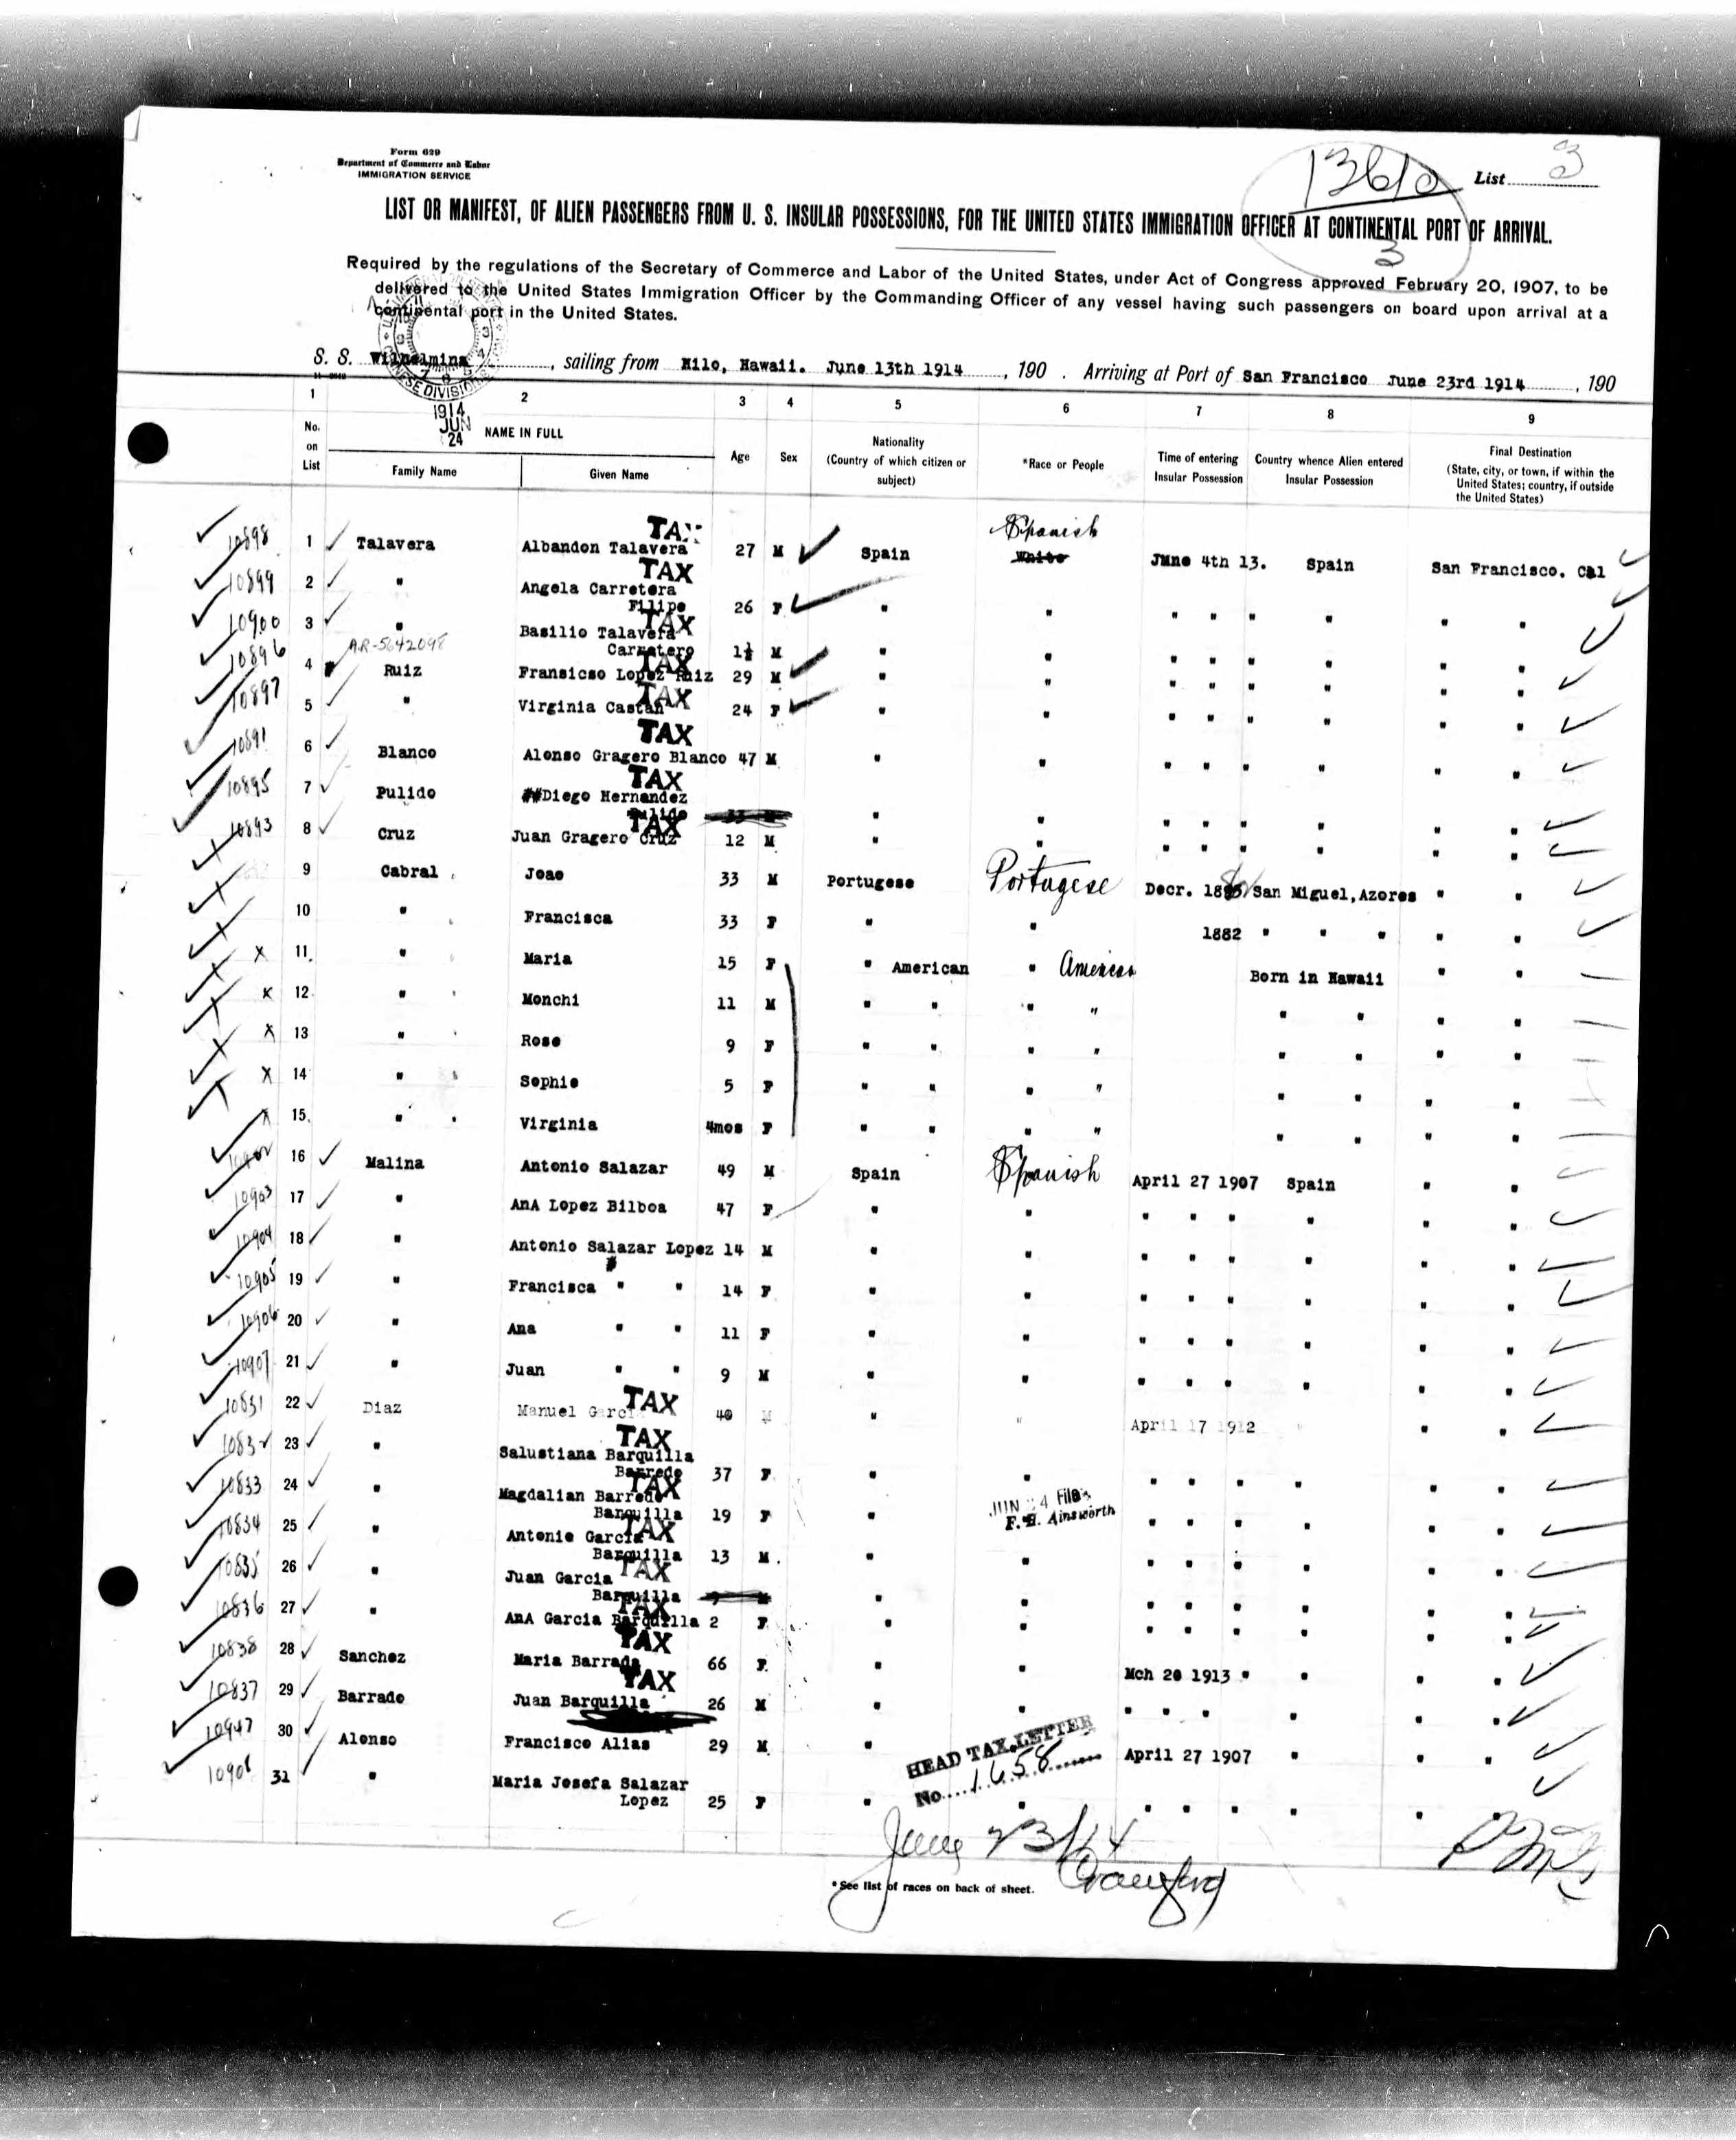 Passenger list of SS Wilhelmina, sailing from Hilo, Hawaii to San Francisco, California, including Virginia Cabral